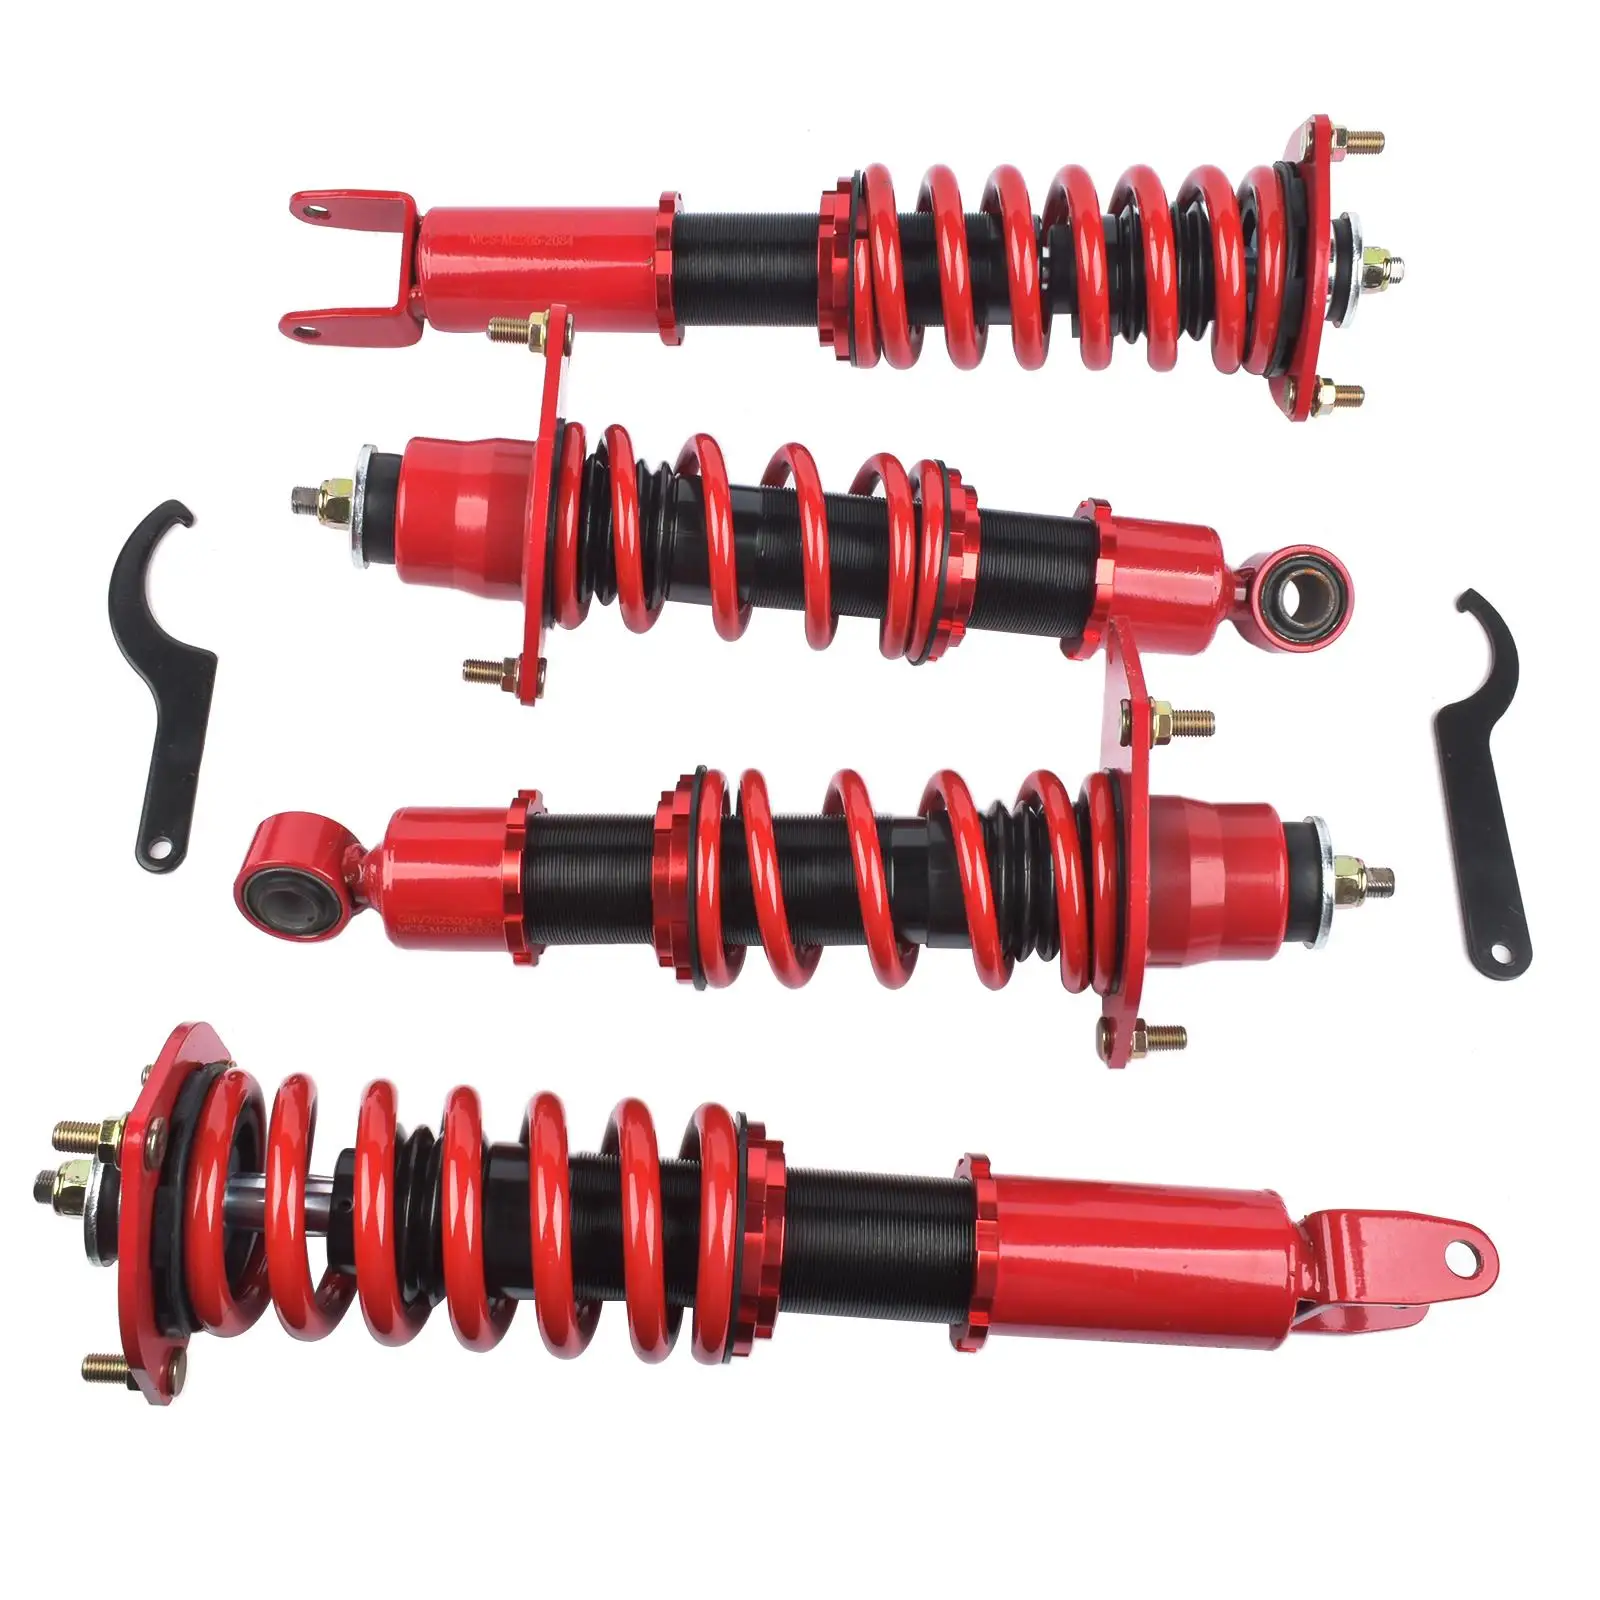 

AP01 Adj Height Coilovers Struts Shocks Suspension Kit For Mazda RX8 2004-2011 A2216800319 A2218230050 2216800319 2218230050